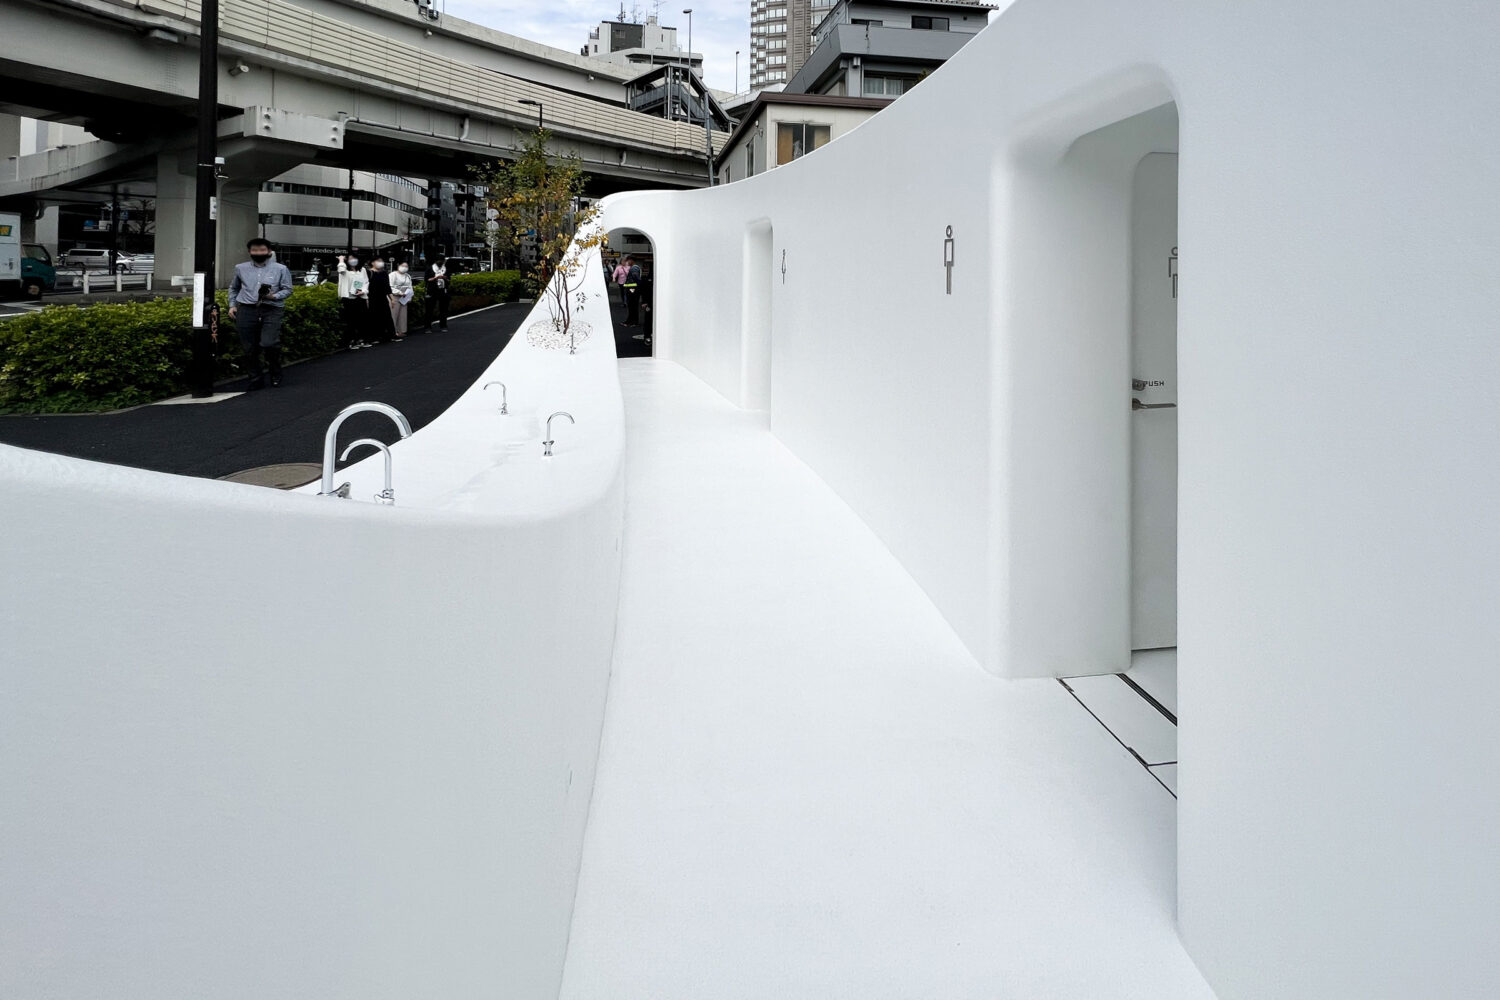 View from the inside The Tokyo Toilet by Sou Fujimoto, Photo by architecturephoto